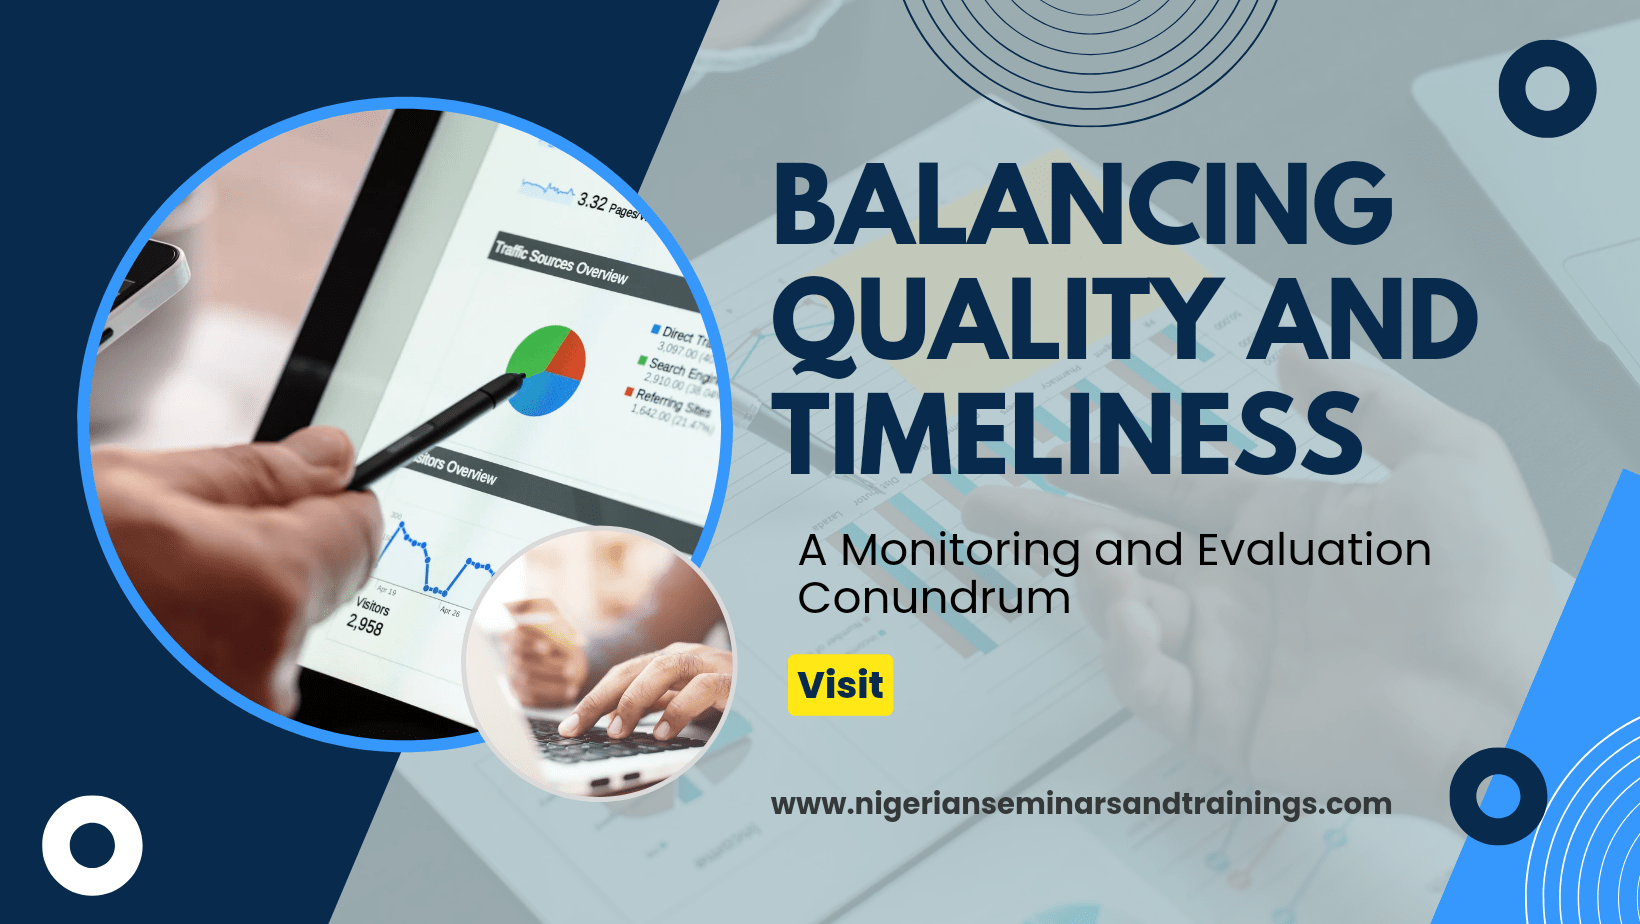 Balancing Quality and Timeliness – A Monitoring and Evaluation Conundrum